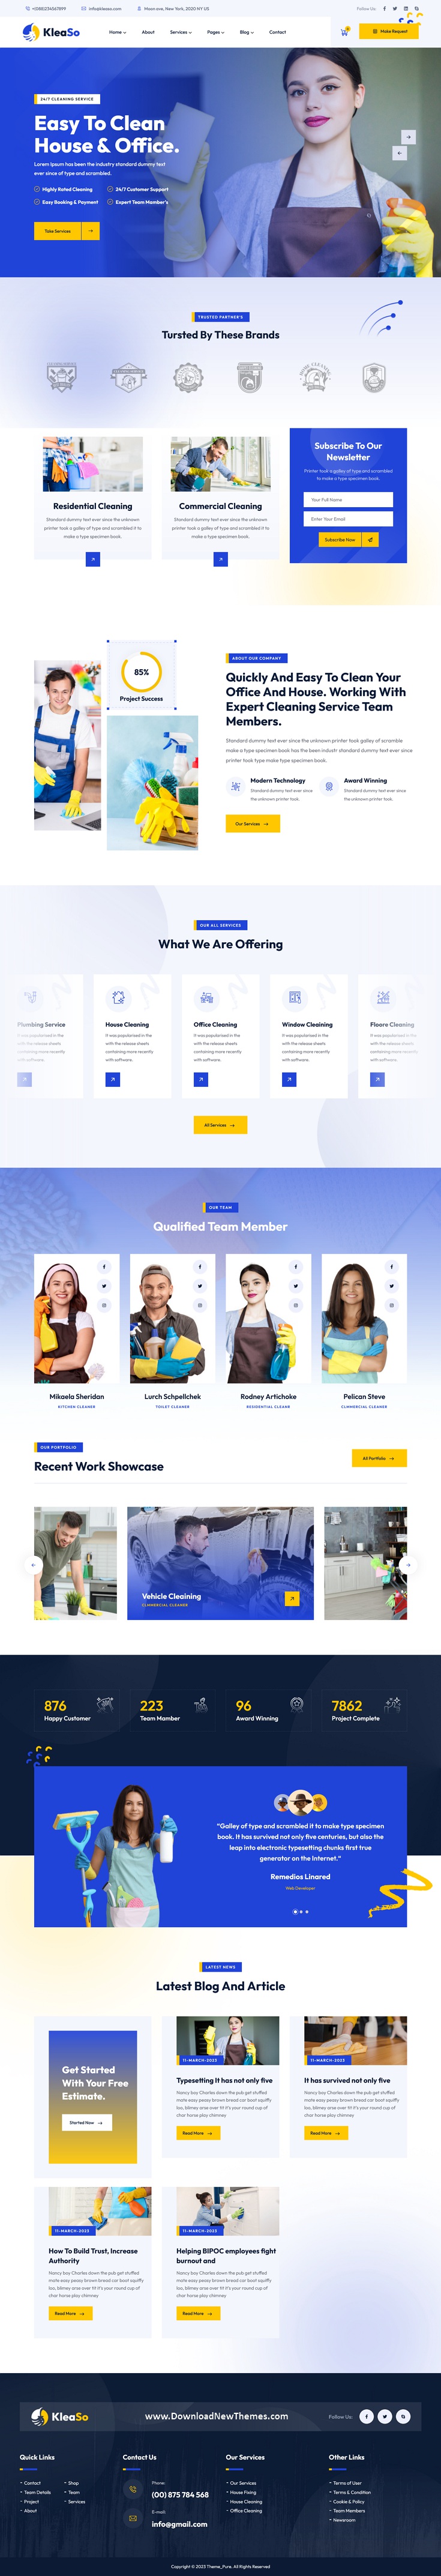 Kleaso - Cleaning Services WordPress Theme Review